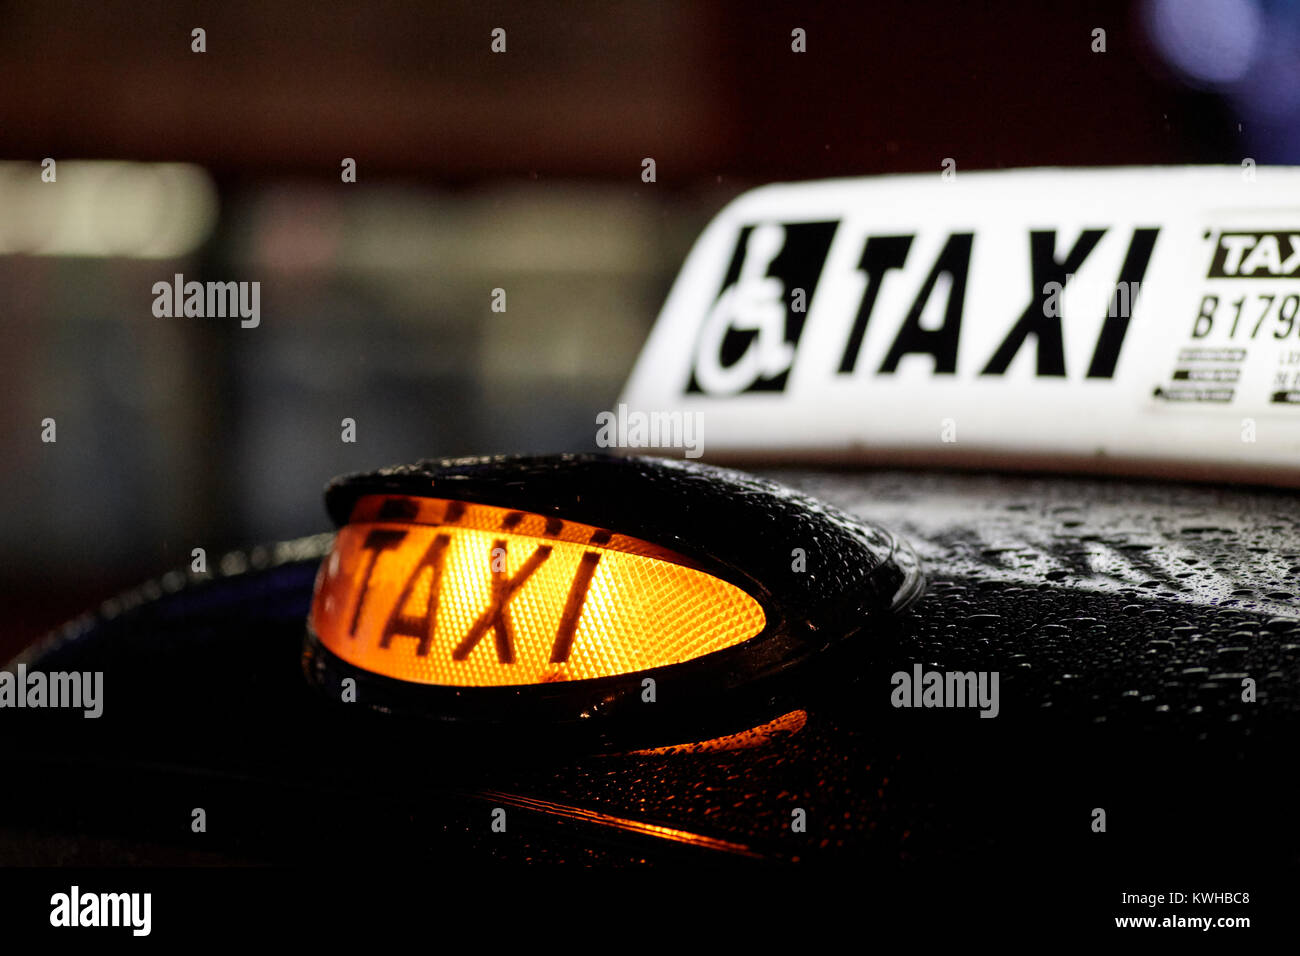 yellow taxi rooftop for hire light at night in the rain belfast northern ireland uk Stock Photo